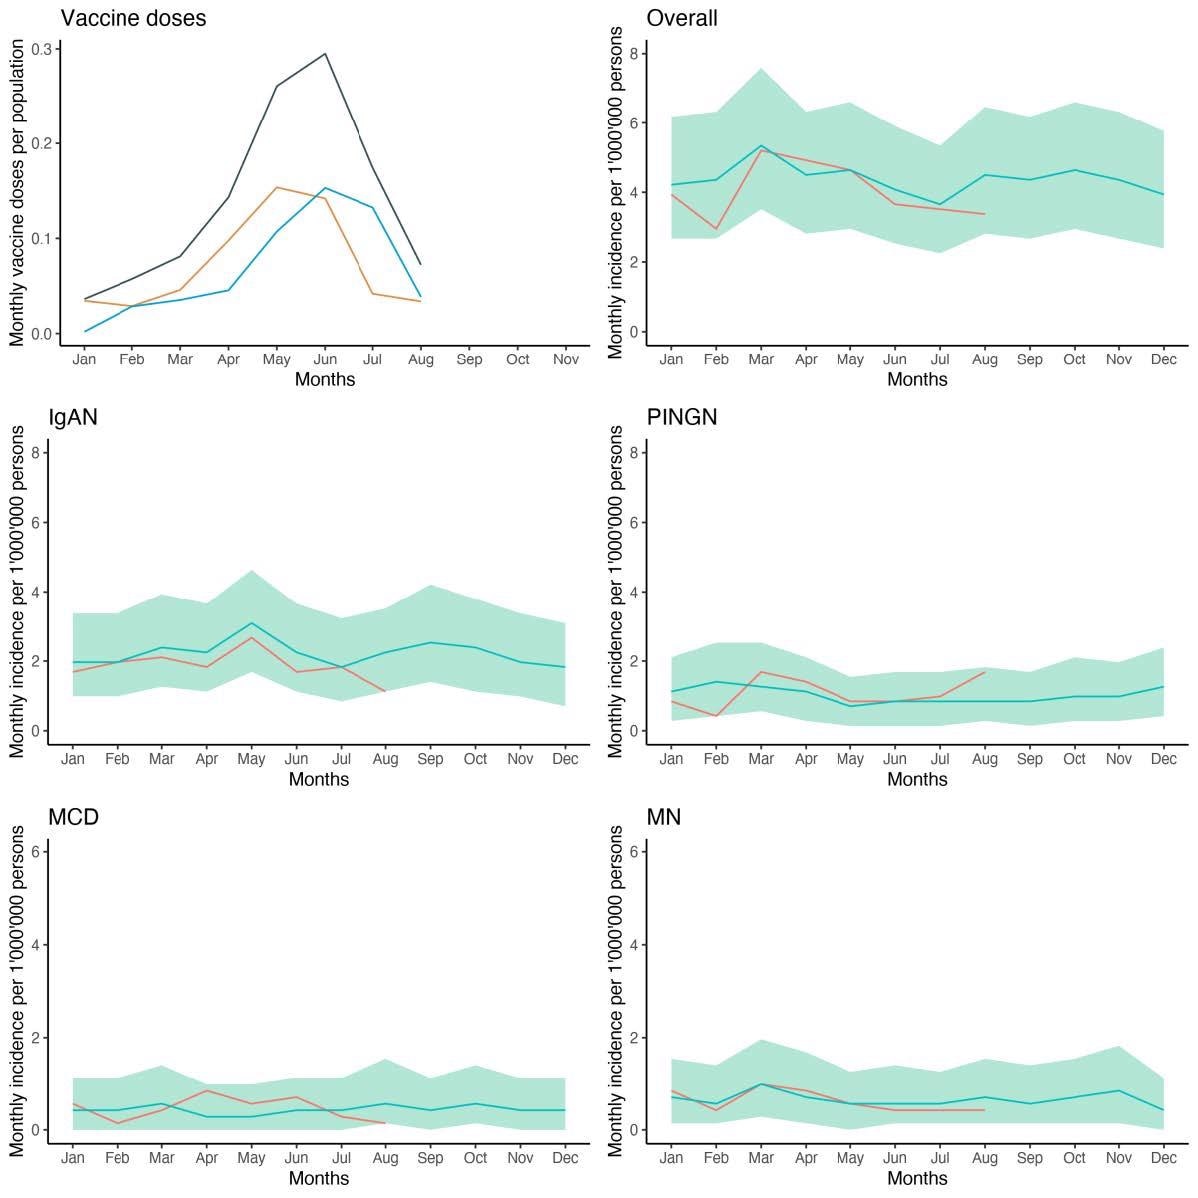 Expected and observed incidence of glomerulonephritis during the vaccination campaign. Shown is the number of first (orange), second (blue) and total (grey) doses of SARS-CoV-2 vaccines as a fraction of all patients aged ≥ 20 years (upper left panel) and the observed incidence of glomerulonephritis in patients aged ≥ 18 years from January to August 2021 (red line) compared to the expected incidence based on the years 2015 to 2019 (blue line) with 95% credible intervals (green shading) for the sum of all four glomerulonephritides, and by diagnosis.